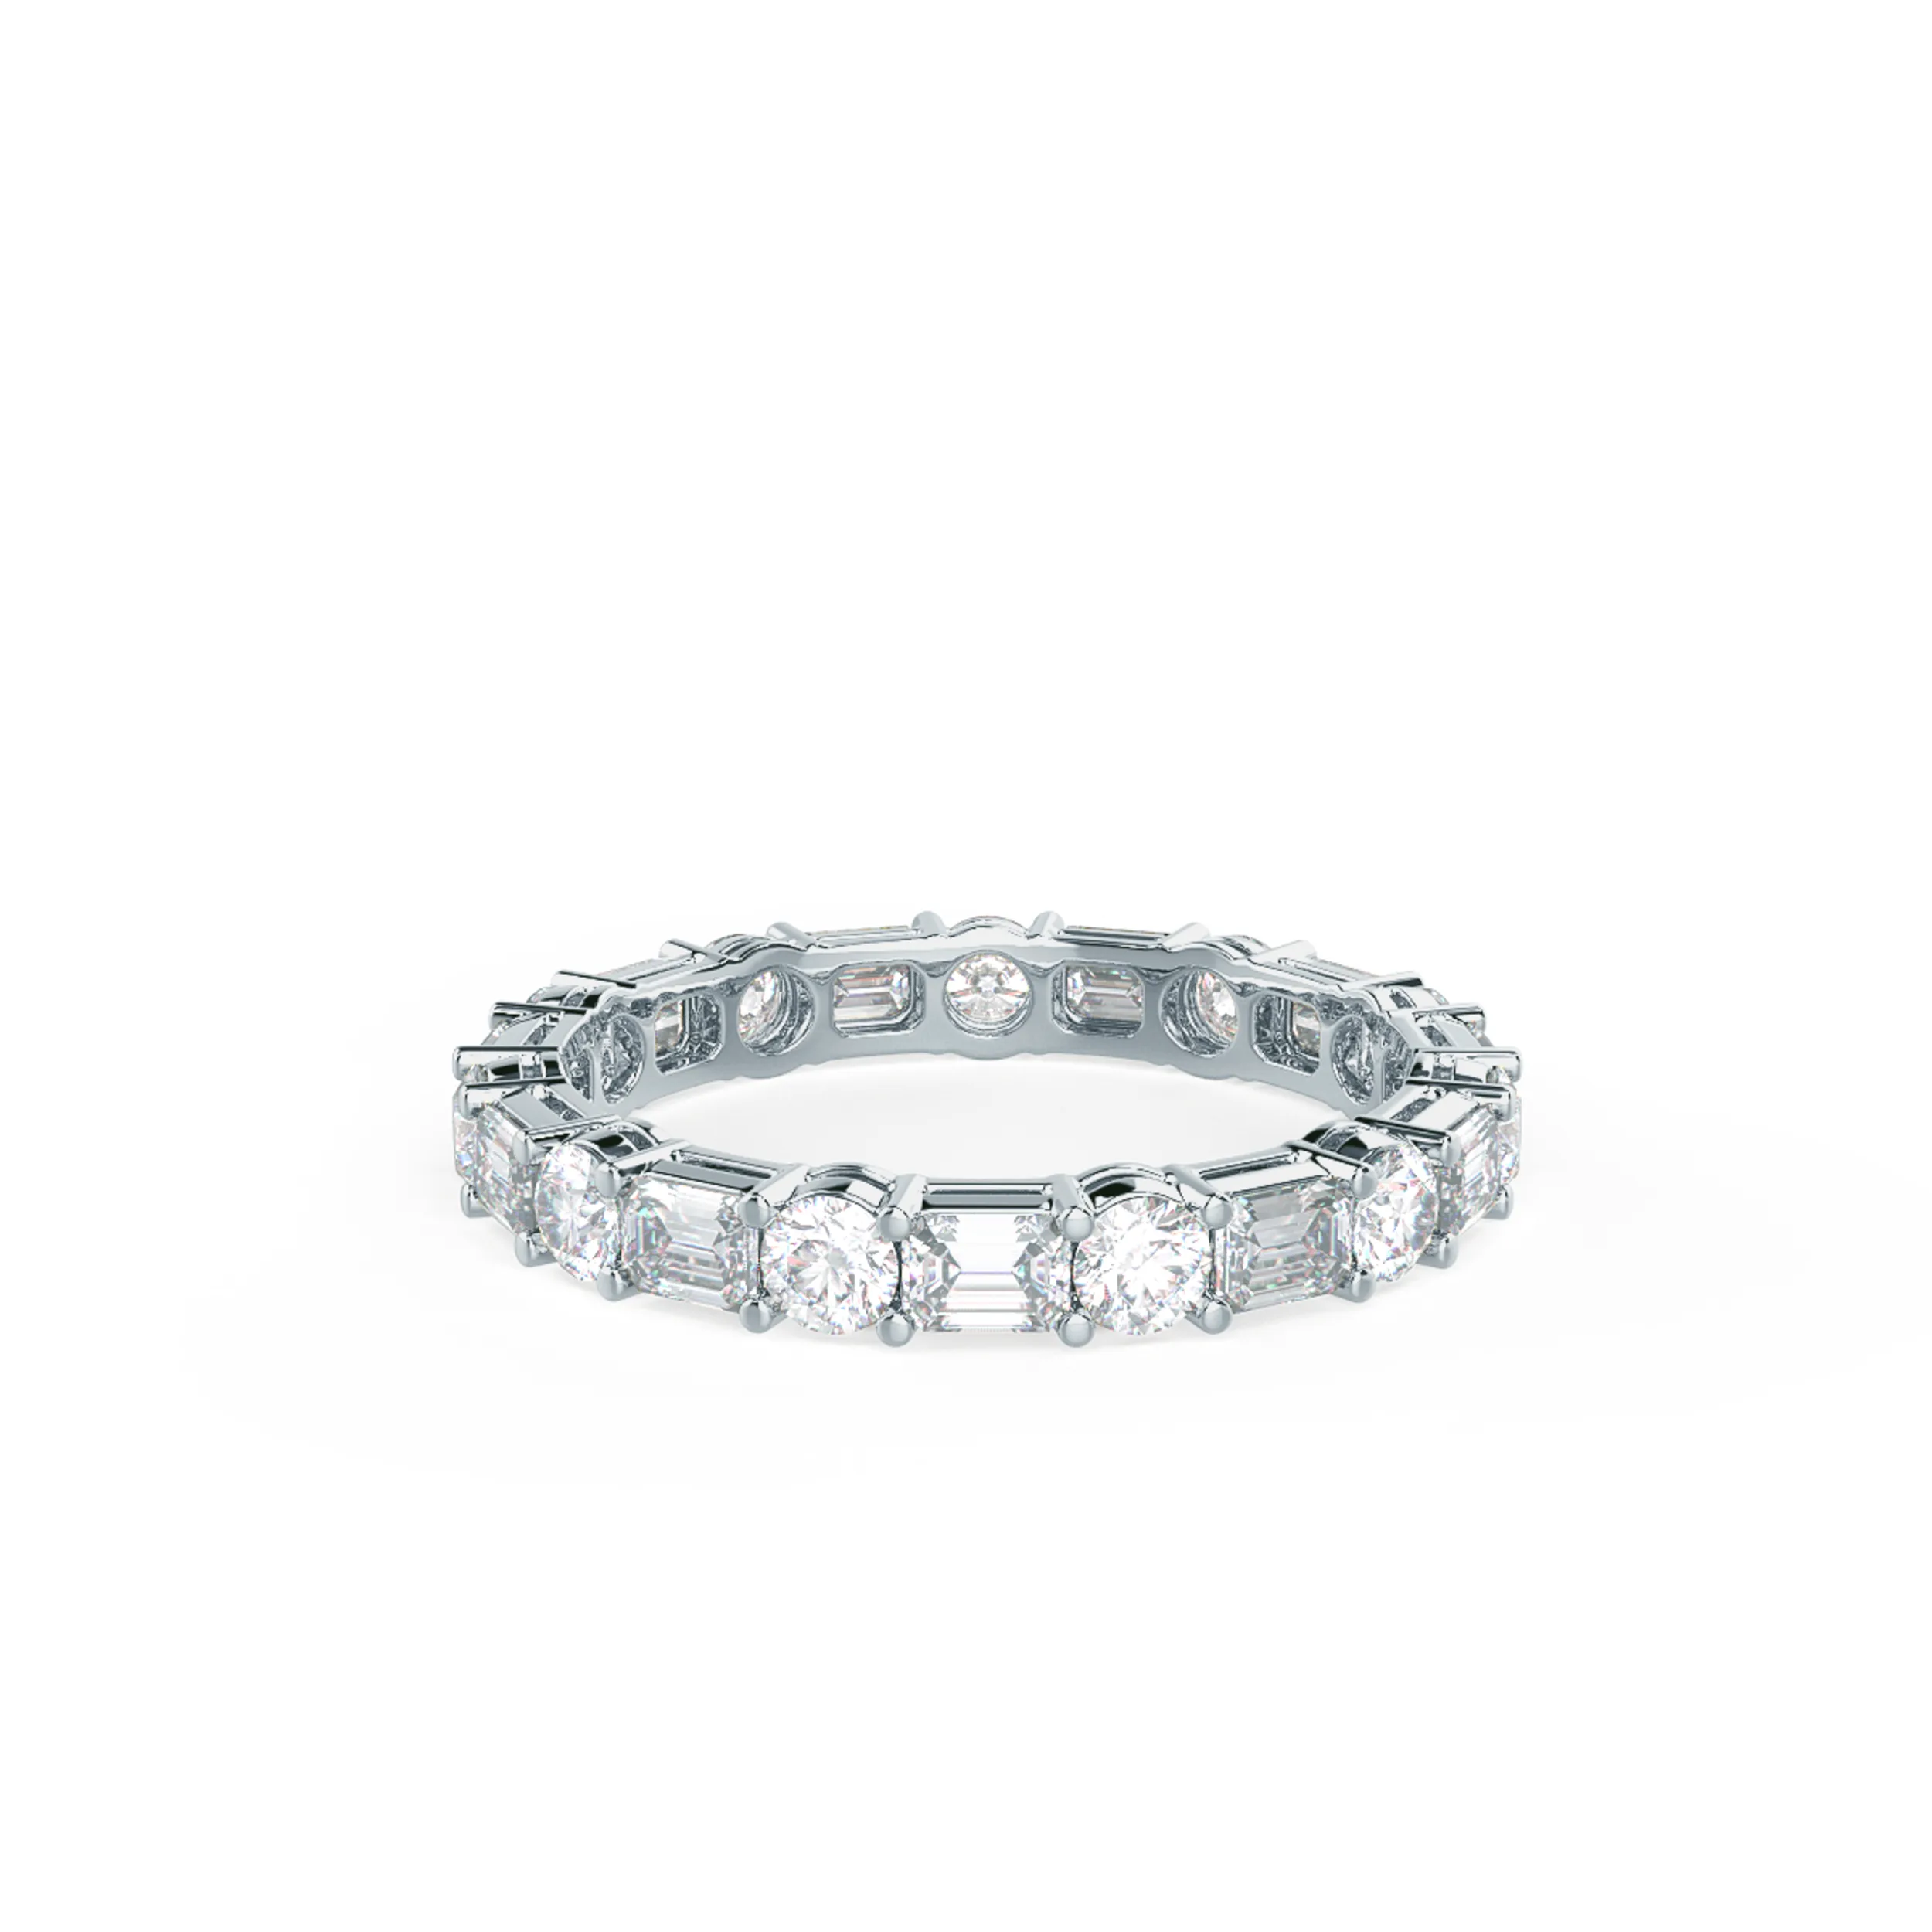 High Quality 2.5 Carat Lab Diamonds set in 18k White Gold Emerald and Round East-West Eternity Band (Main View)